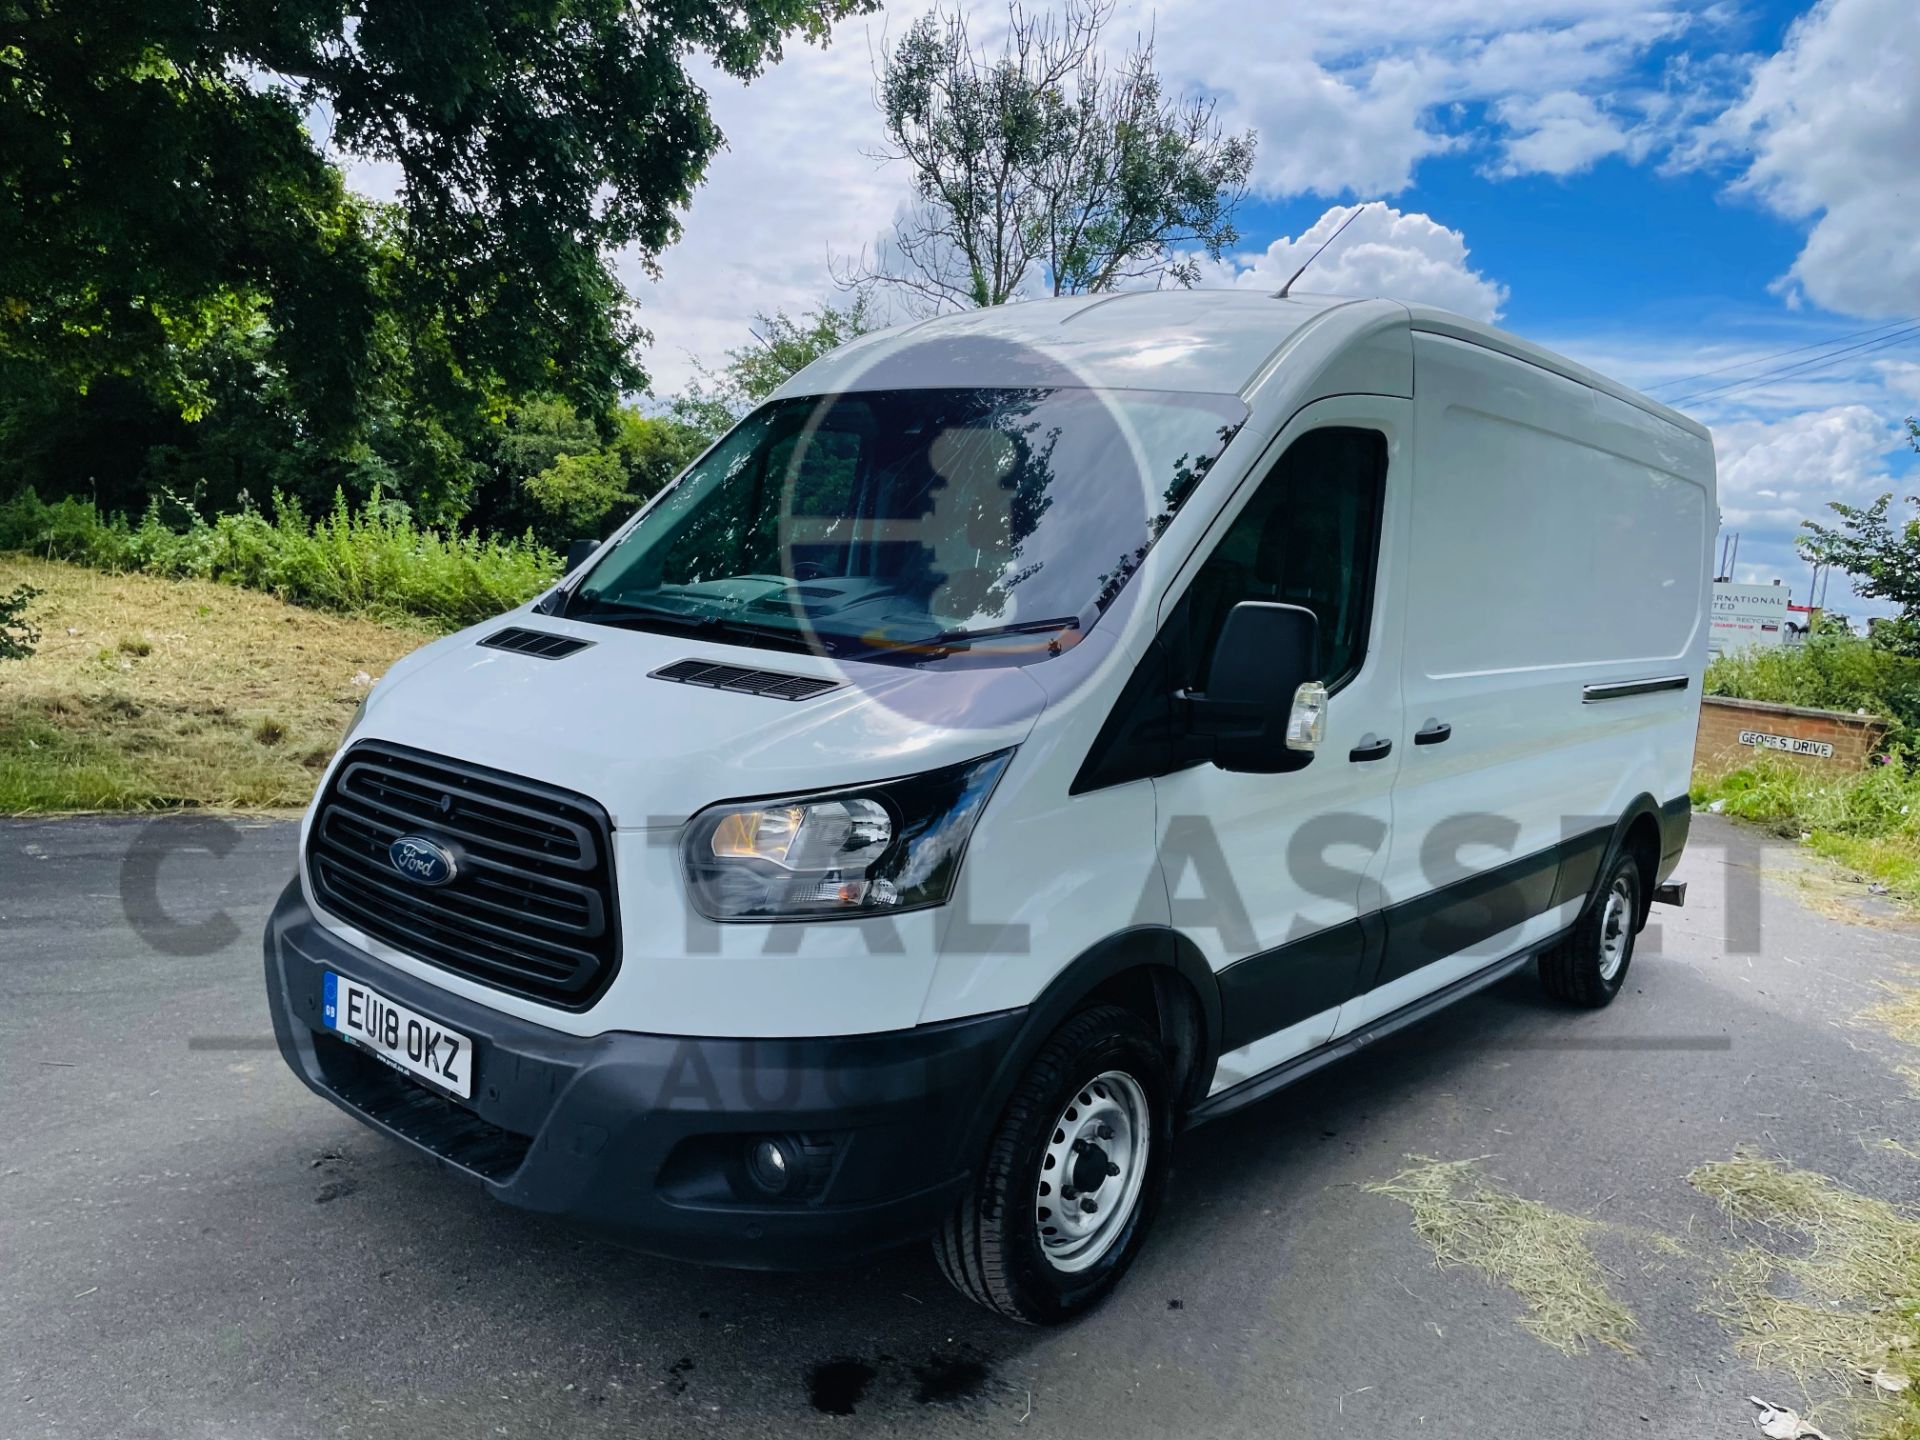 (On Sale) FORD TRANSIT *PANEL VAN* (2018 - EURO 6) 2.0 TDCI 'ECOBLUE' (1 OWNER) *AIR CON & NAV* - Image 5 of 43